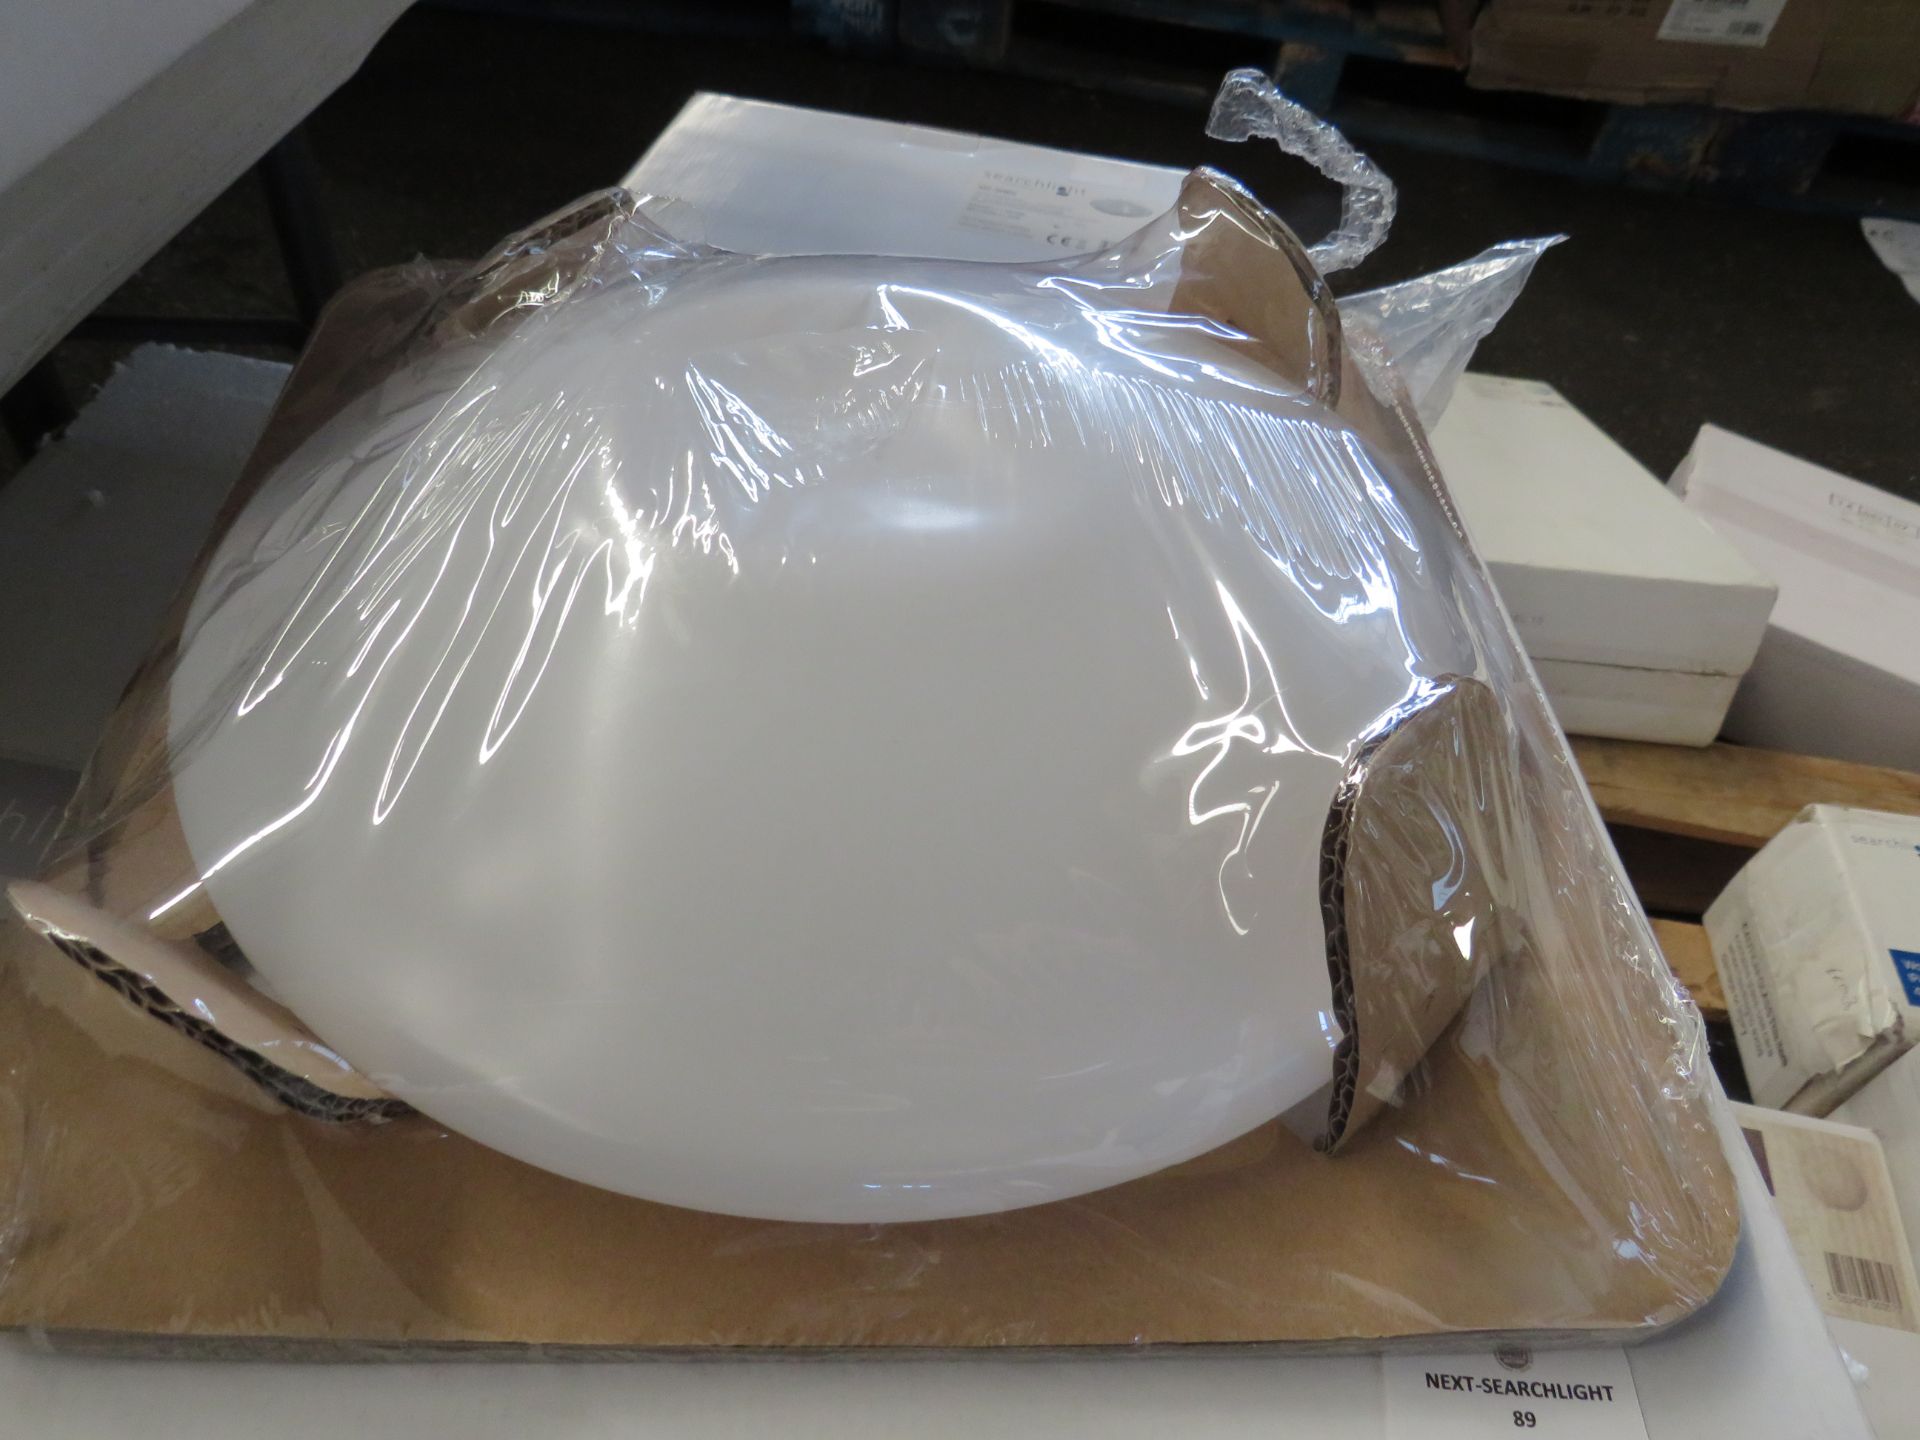 Searchlight 30Cm Diameter White Acrylic Flush 302-30Wh RRP ô?18.00 - This lot contains unsorted